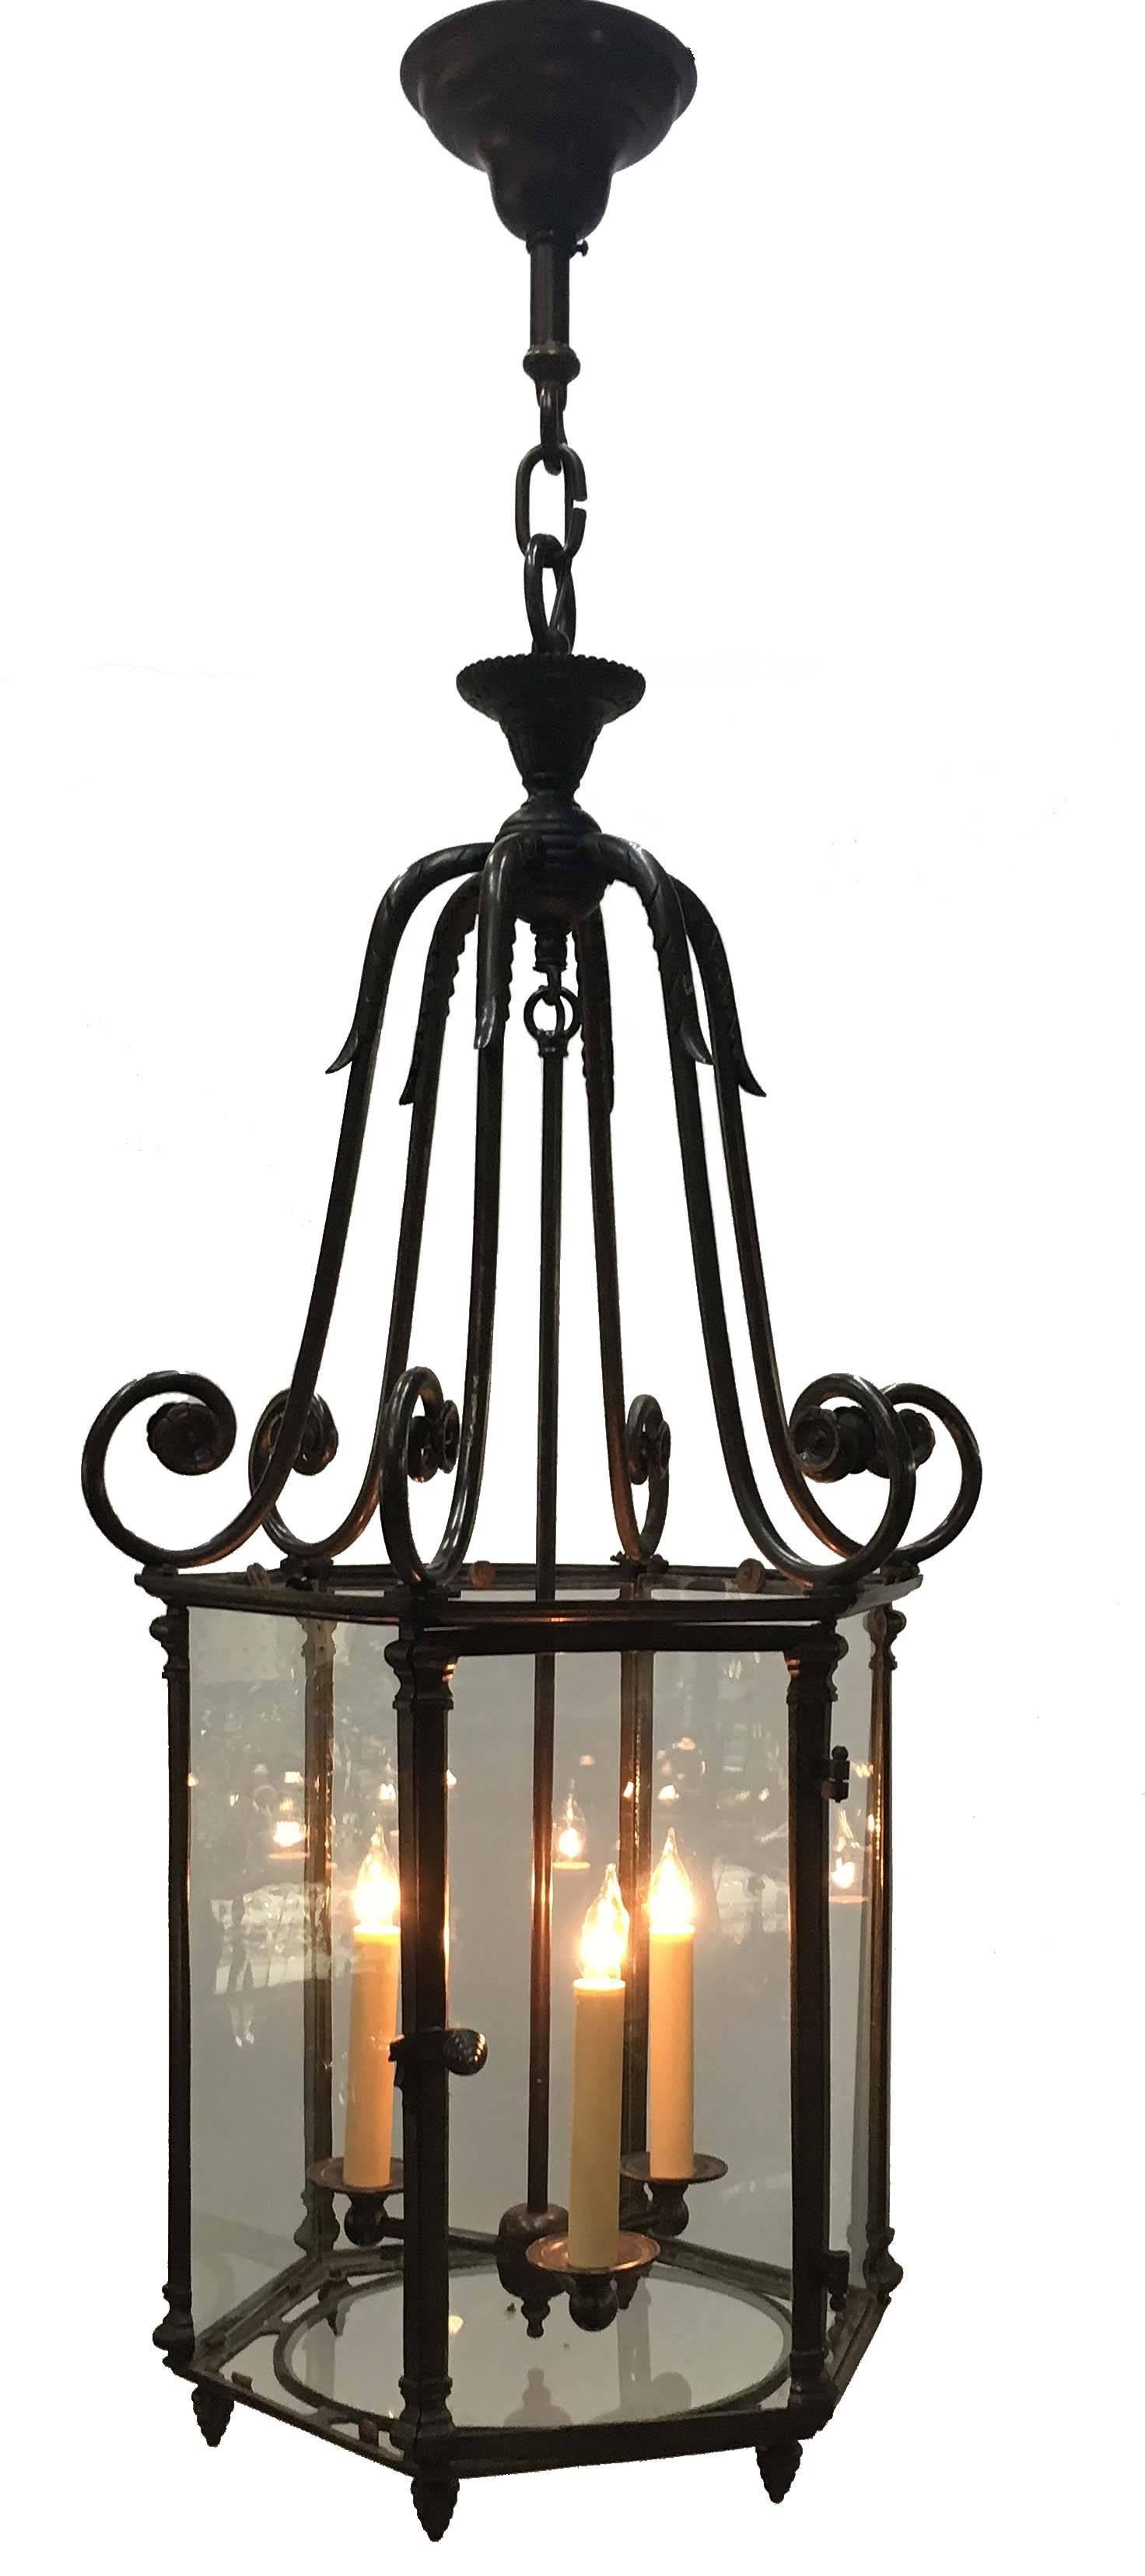 An antique Louis XV style brass hexagonal  lantern, supported by six scrolling arms later fitted for electricity with a three-light cluster. This was originally a gas fixture.